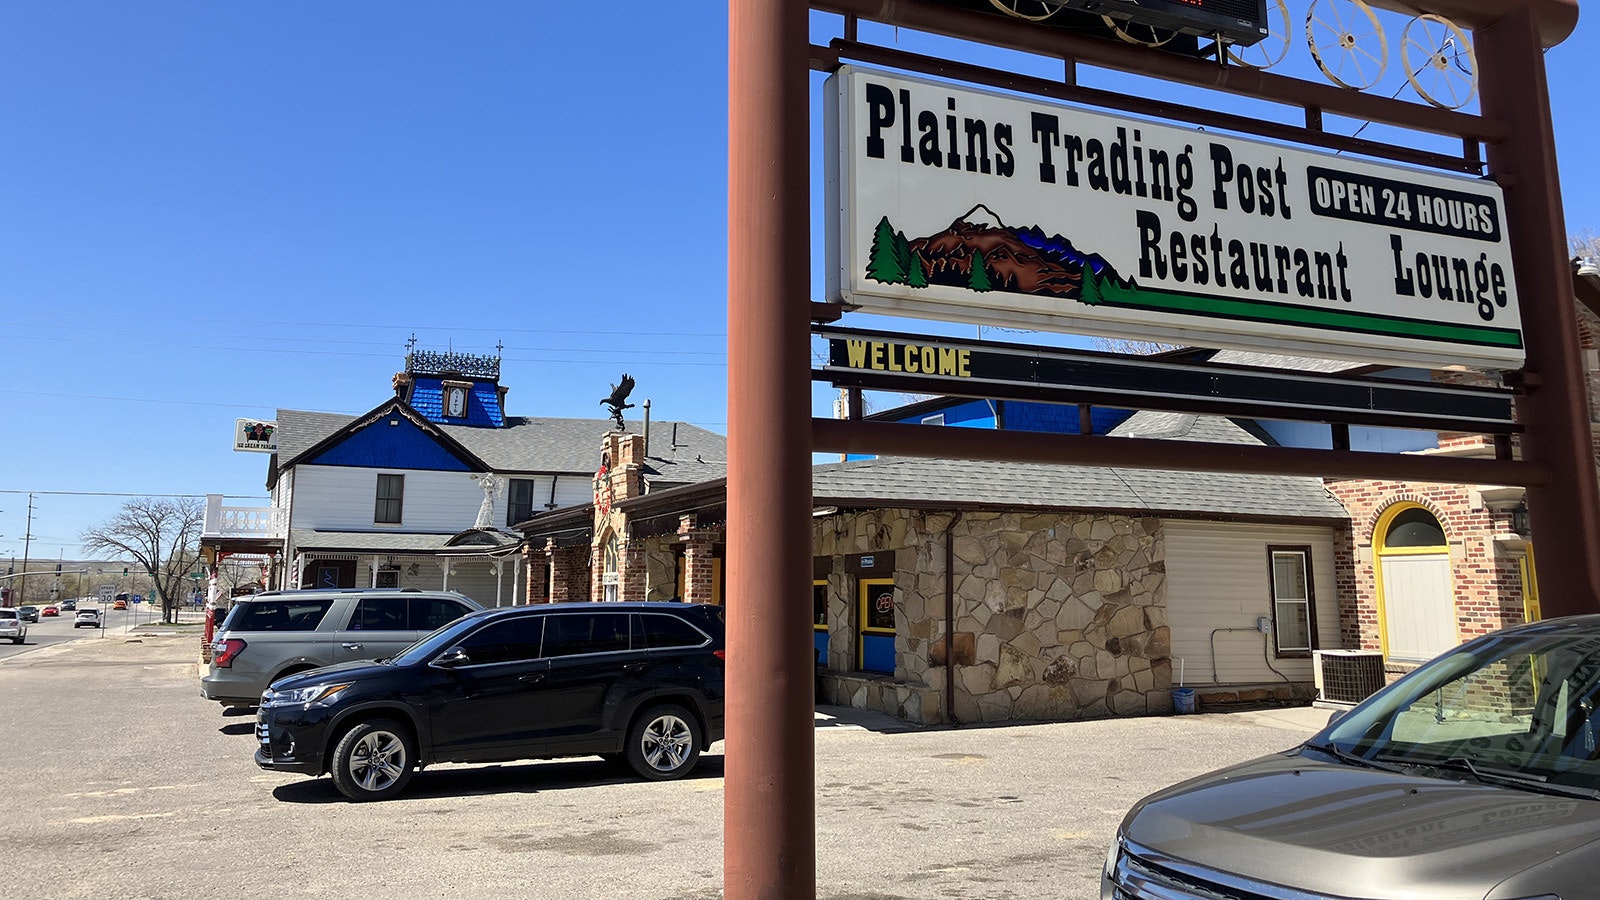 The Plains Trading Post in Douglas contains several historic structures architecturally put together into an ice cream parlor, restaurant, lounge, and motel.